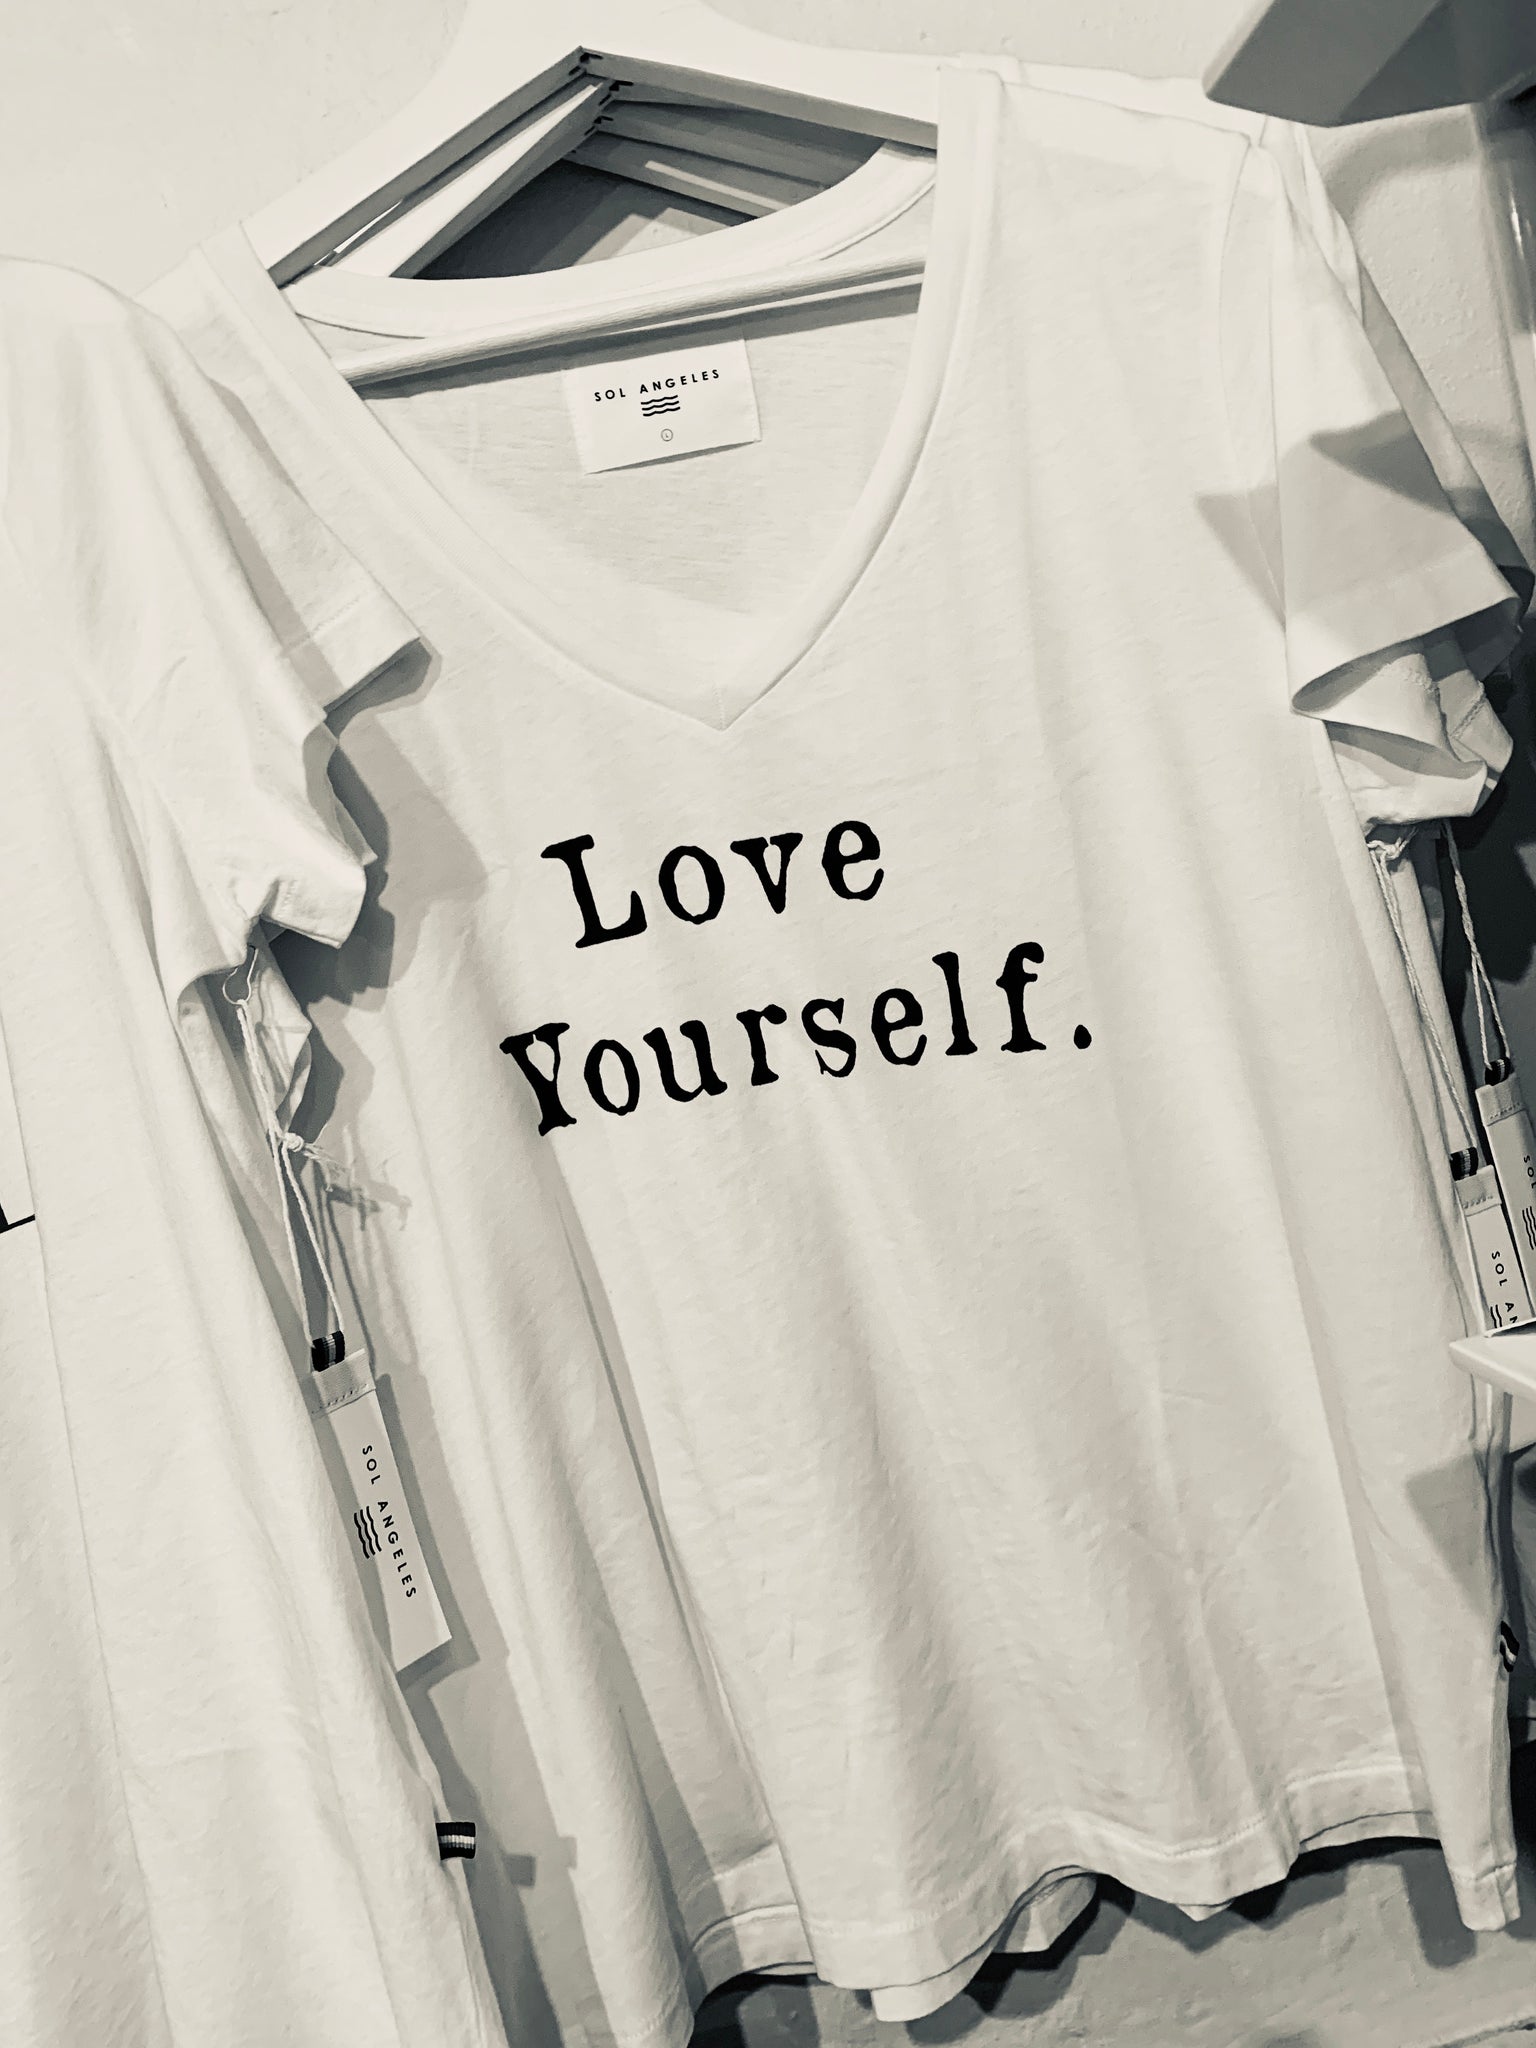 Sol Angeles Love Yourself V tee